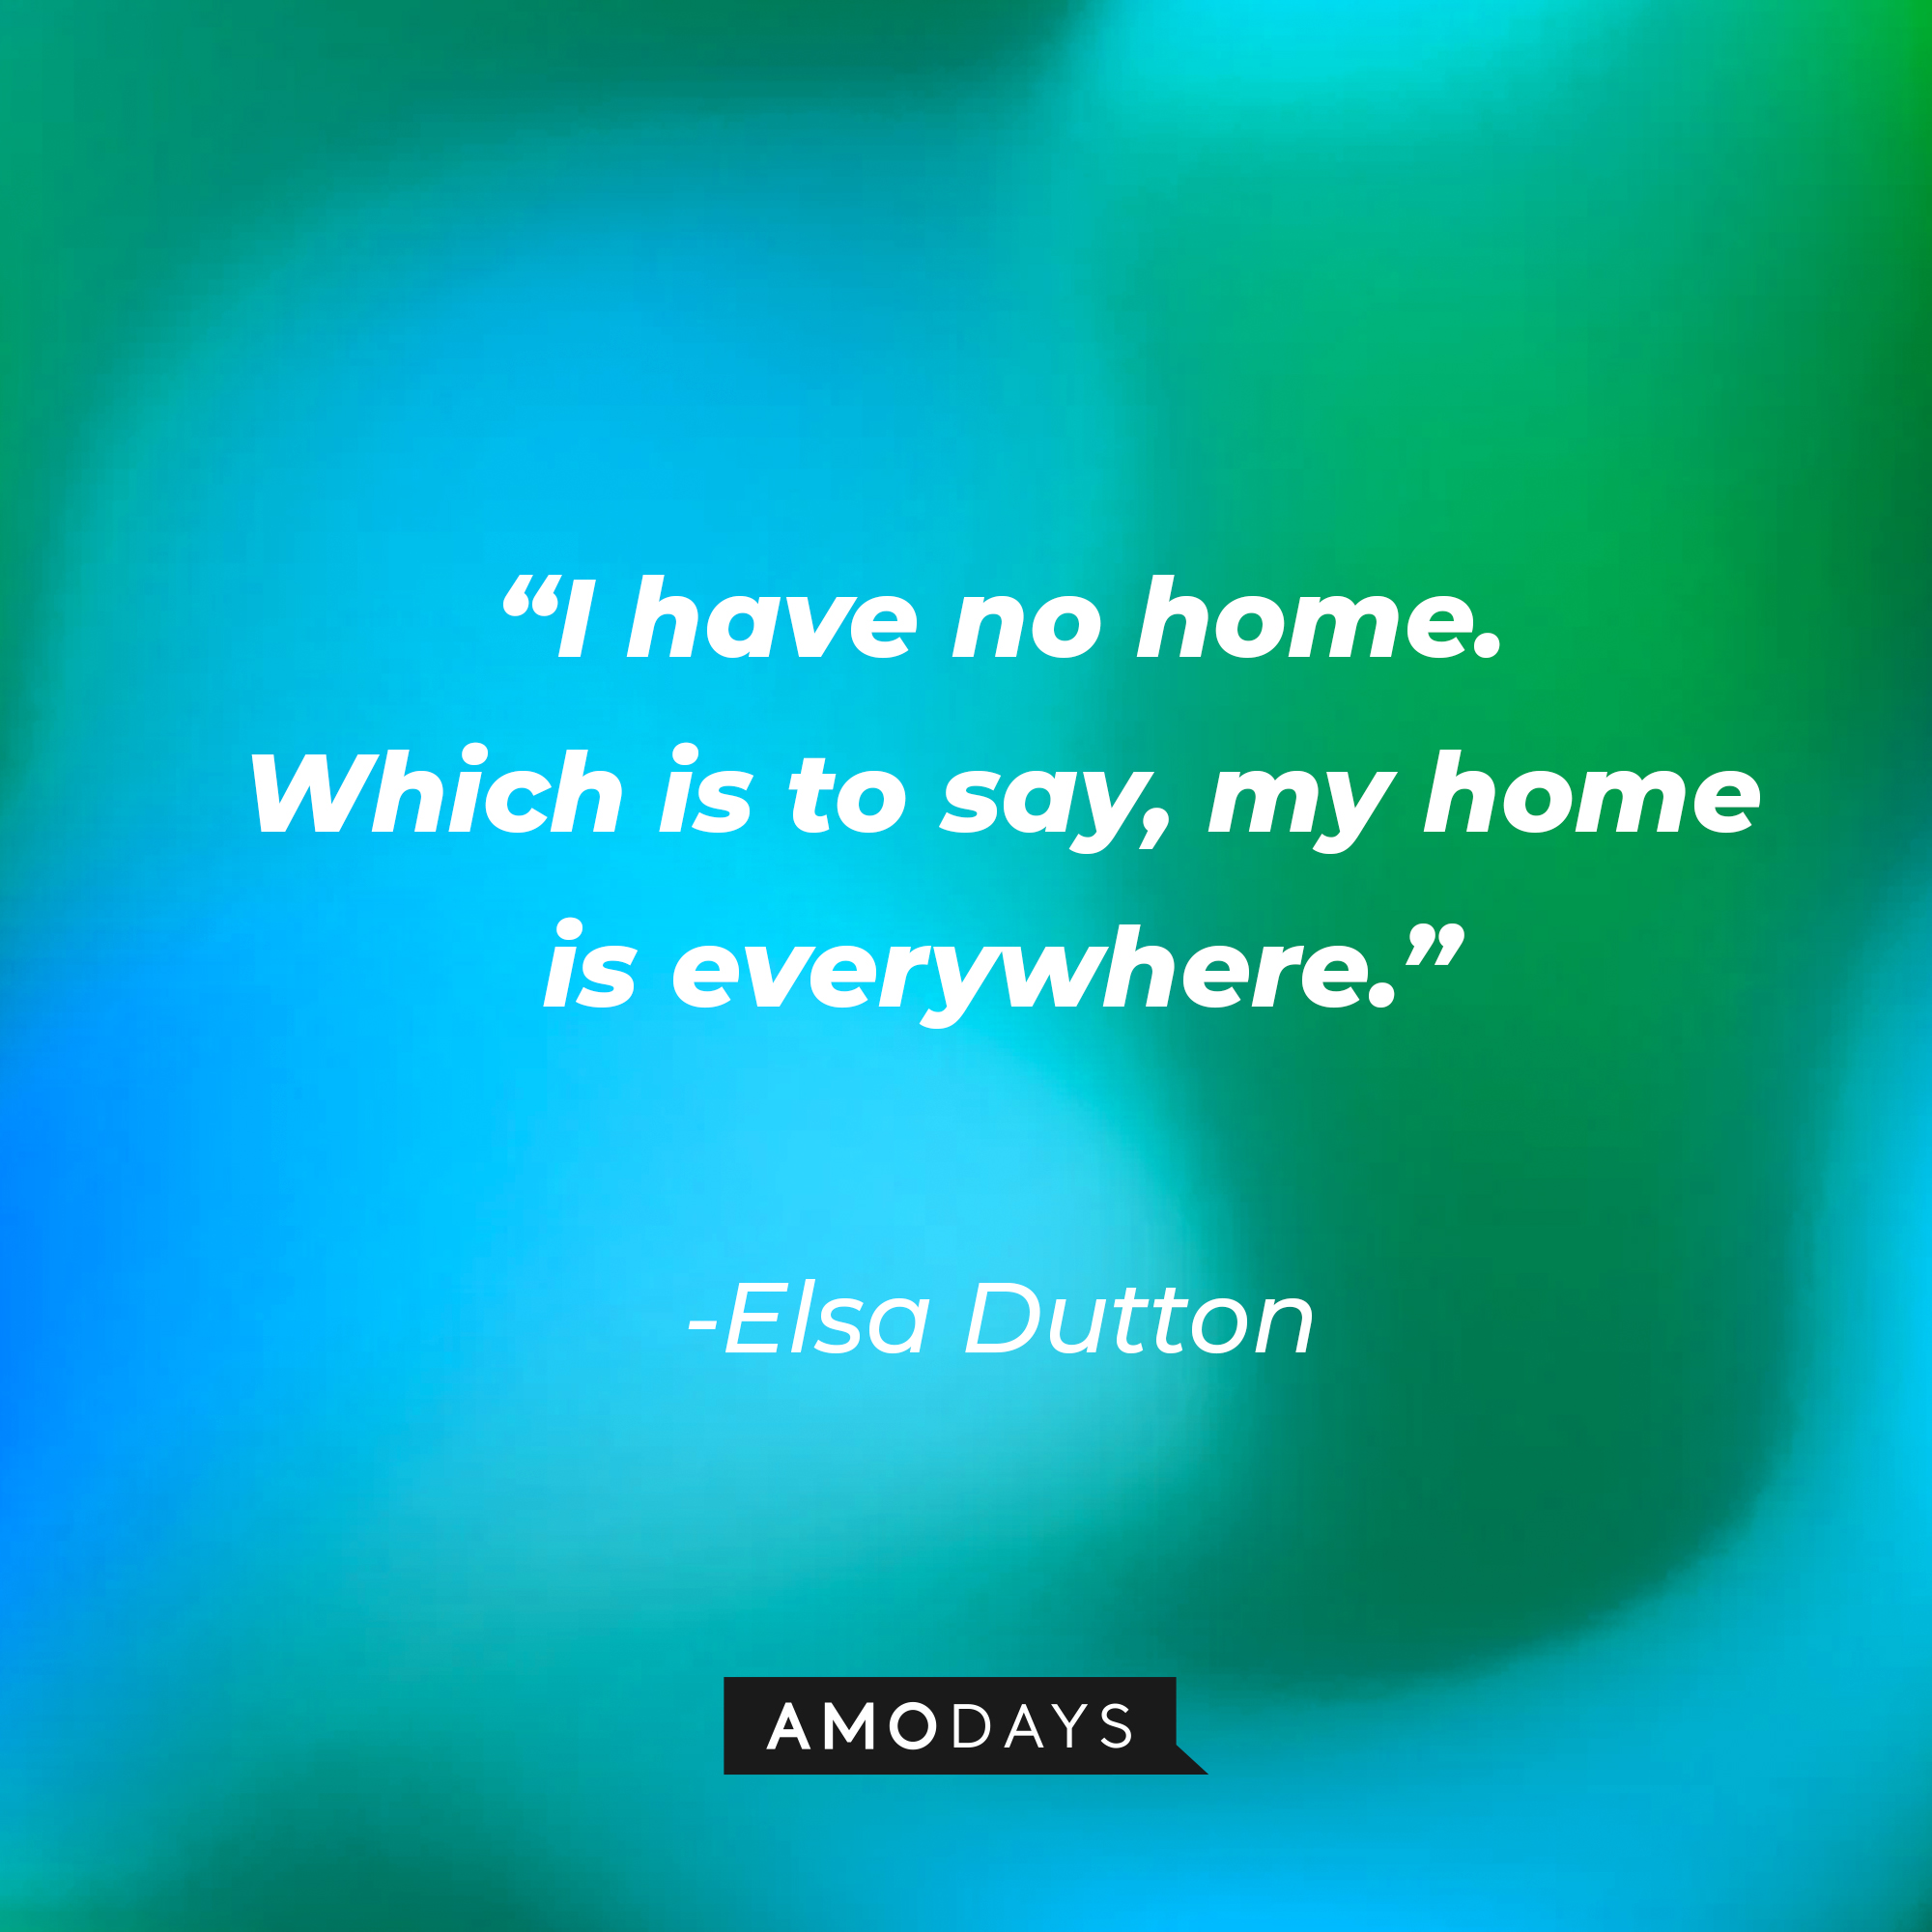 Elsa Dutton’s quote: “I have no home. Which is to say, my home is everywhere.” | Source: AmoDays